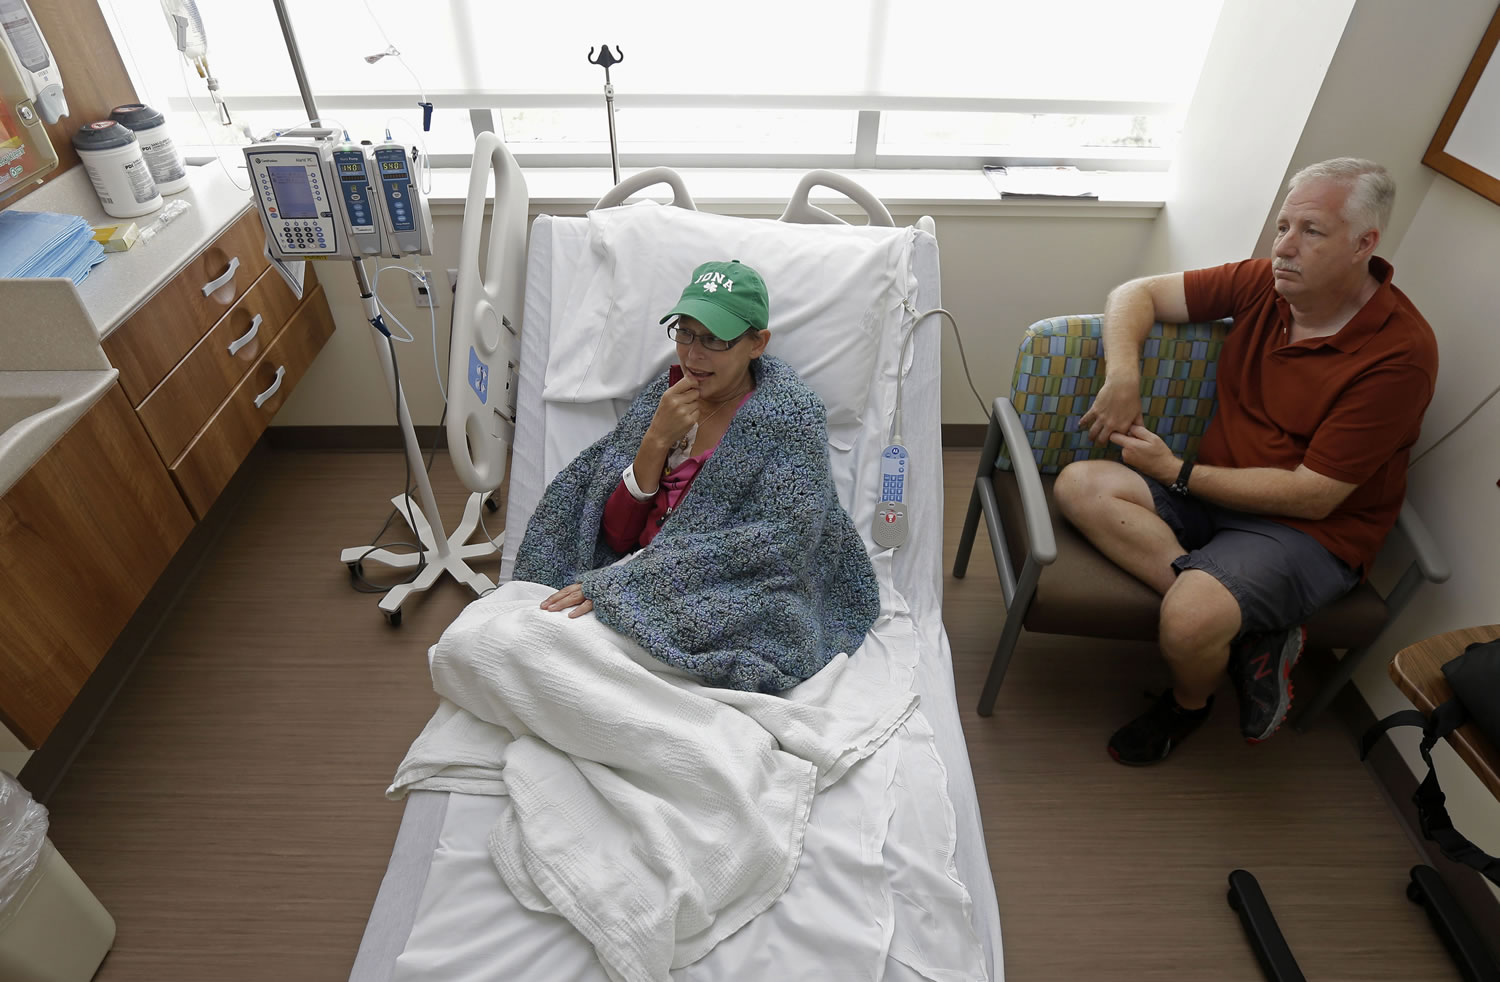 Bev Veals, left, undergoes chemotherapy treatment, accompanied by her husband, Scott, at Duke Cancer Center in Durham, N.C.